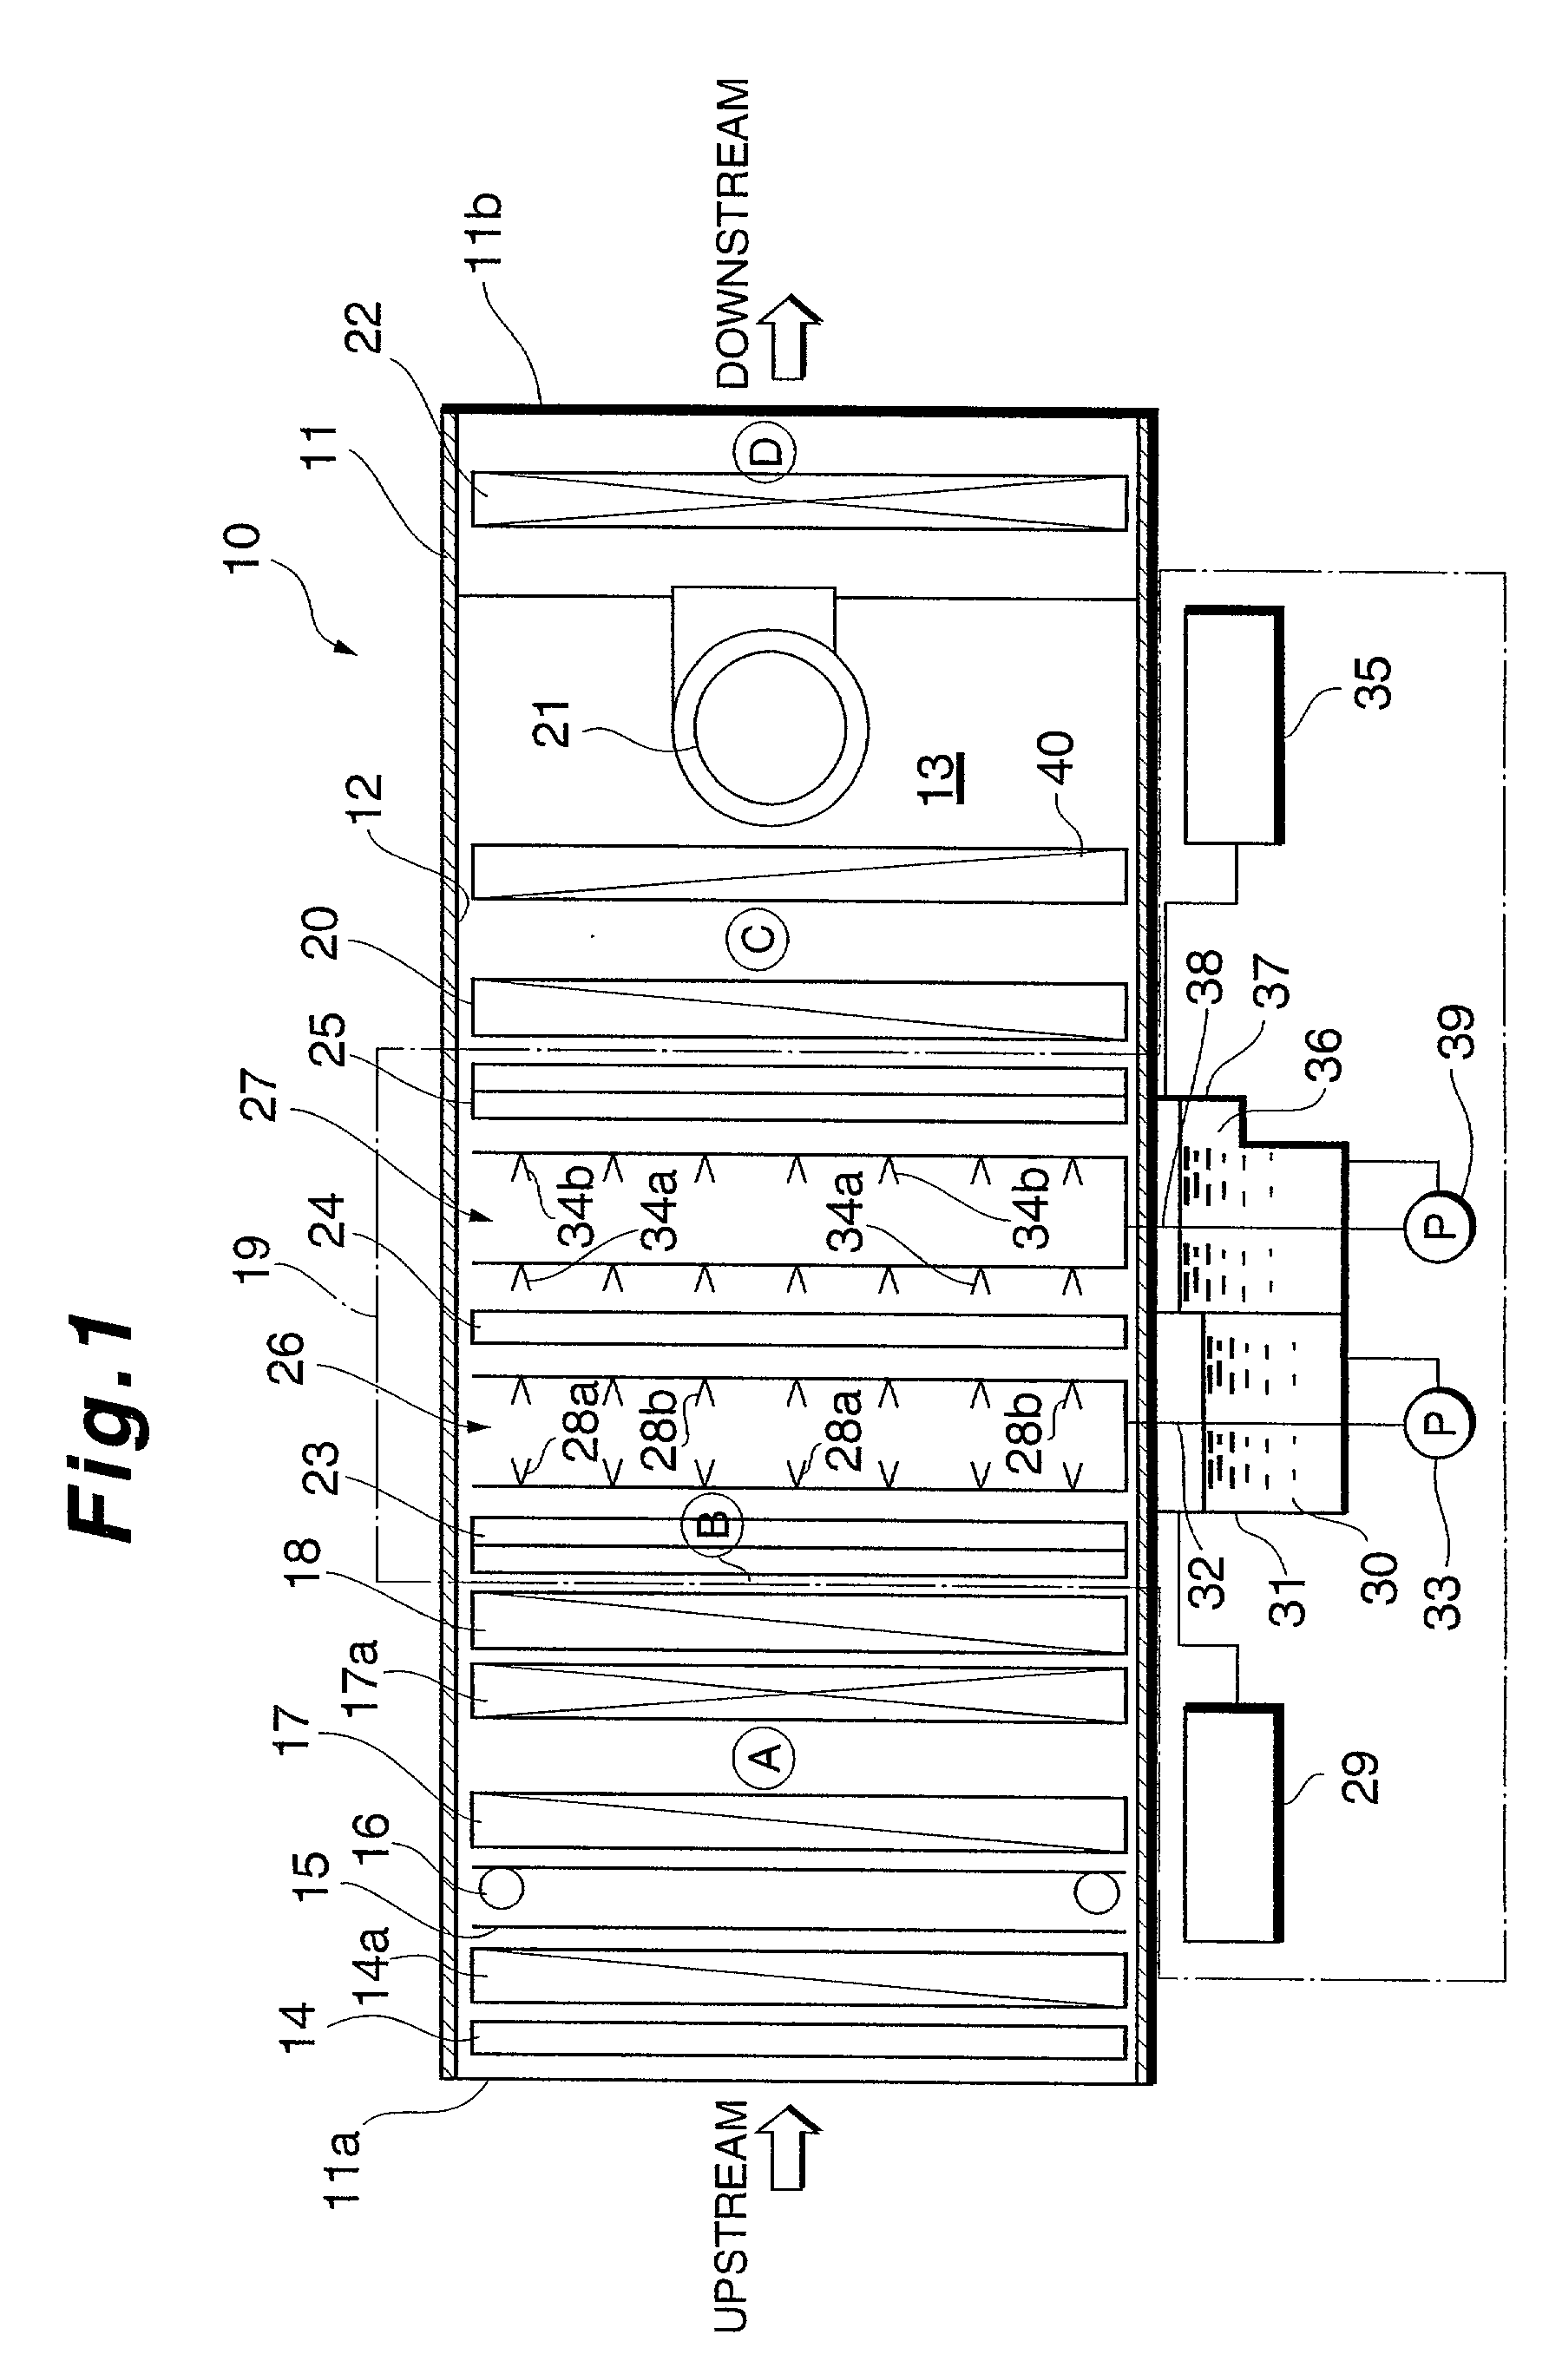 Apparatus for removing impurity contents in the air